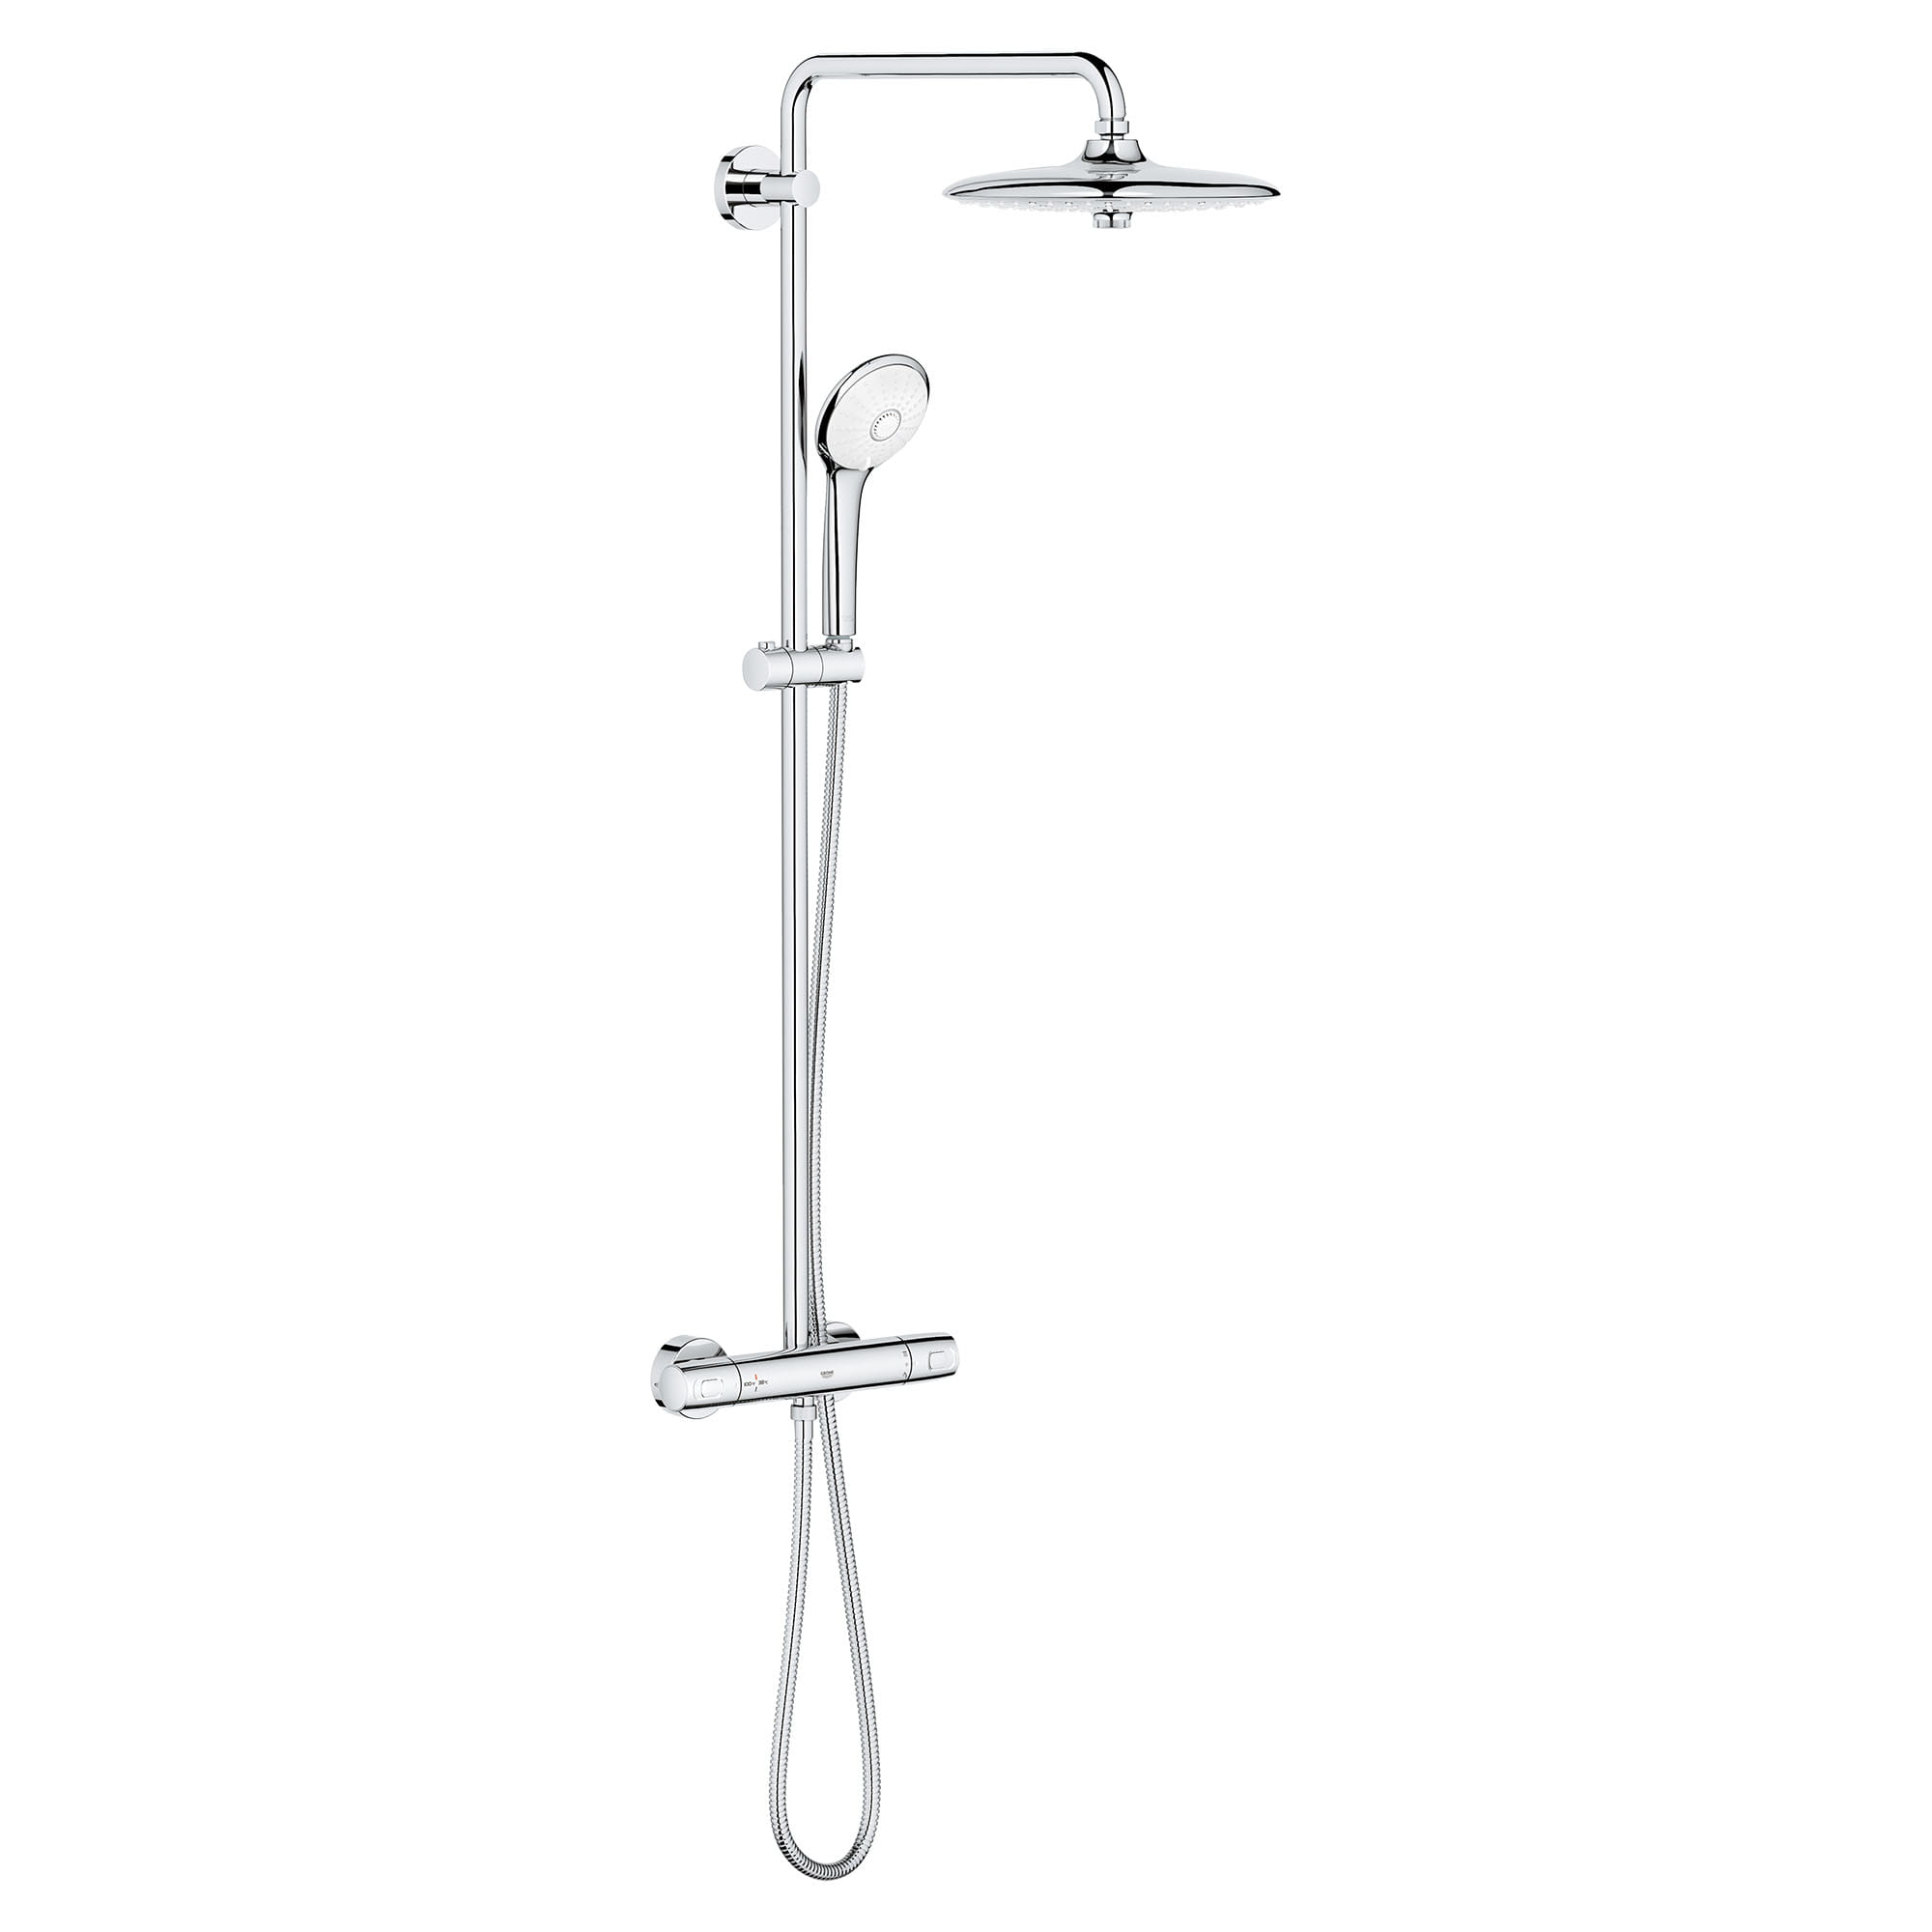 Euphoria 260 Cooltouch Shower System in Brushed Nickel, 1.75 gpm